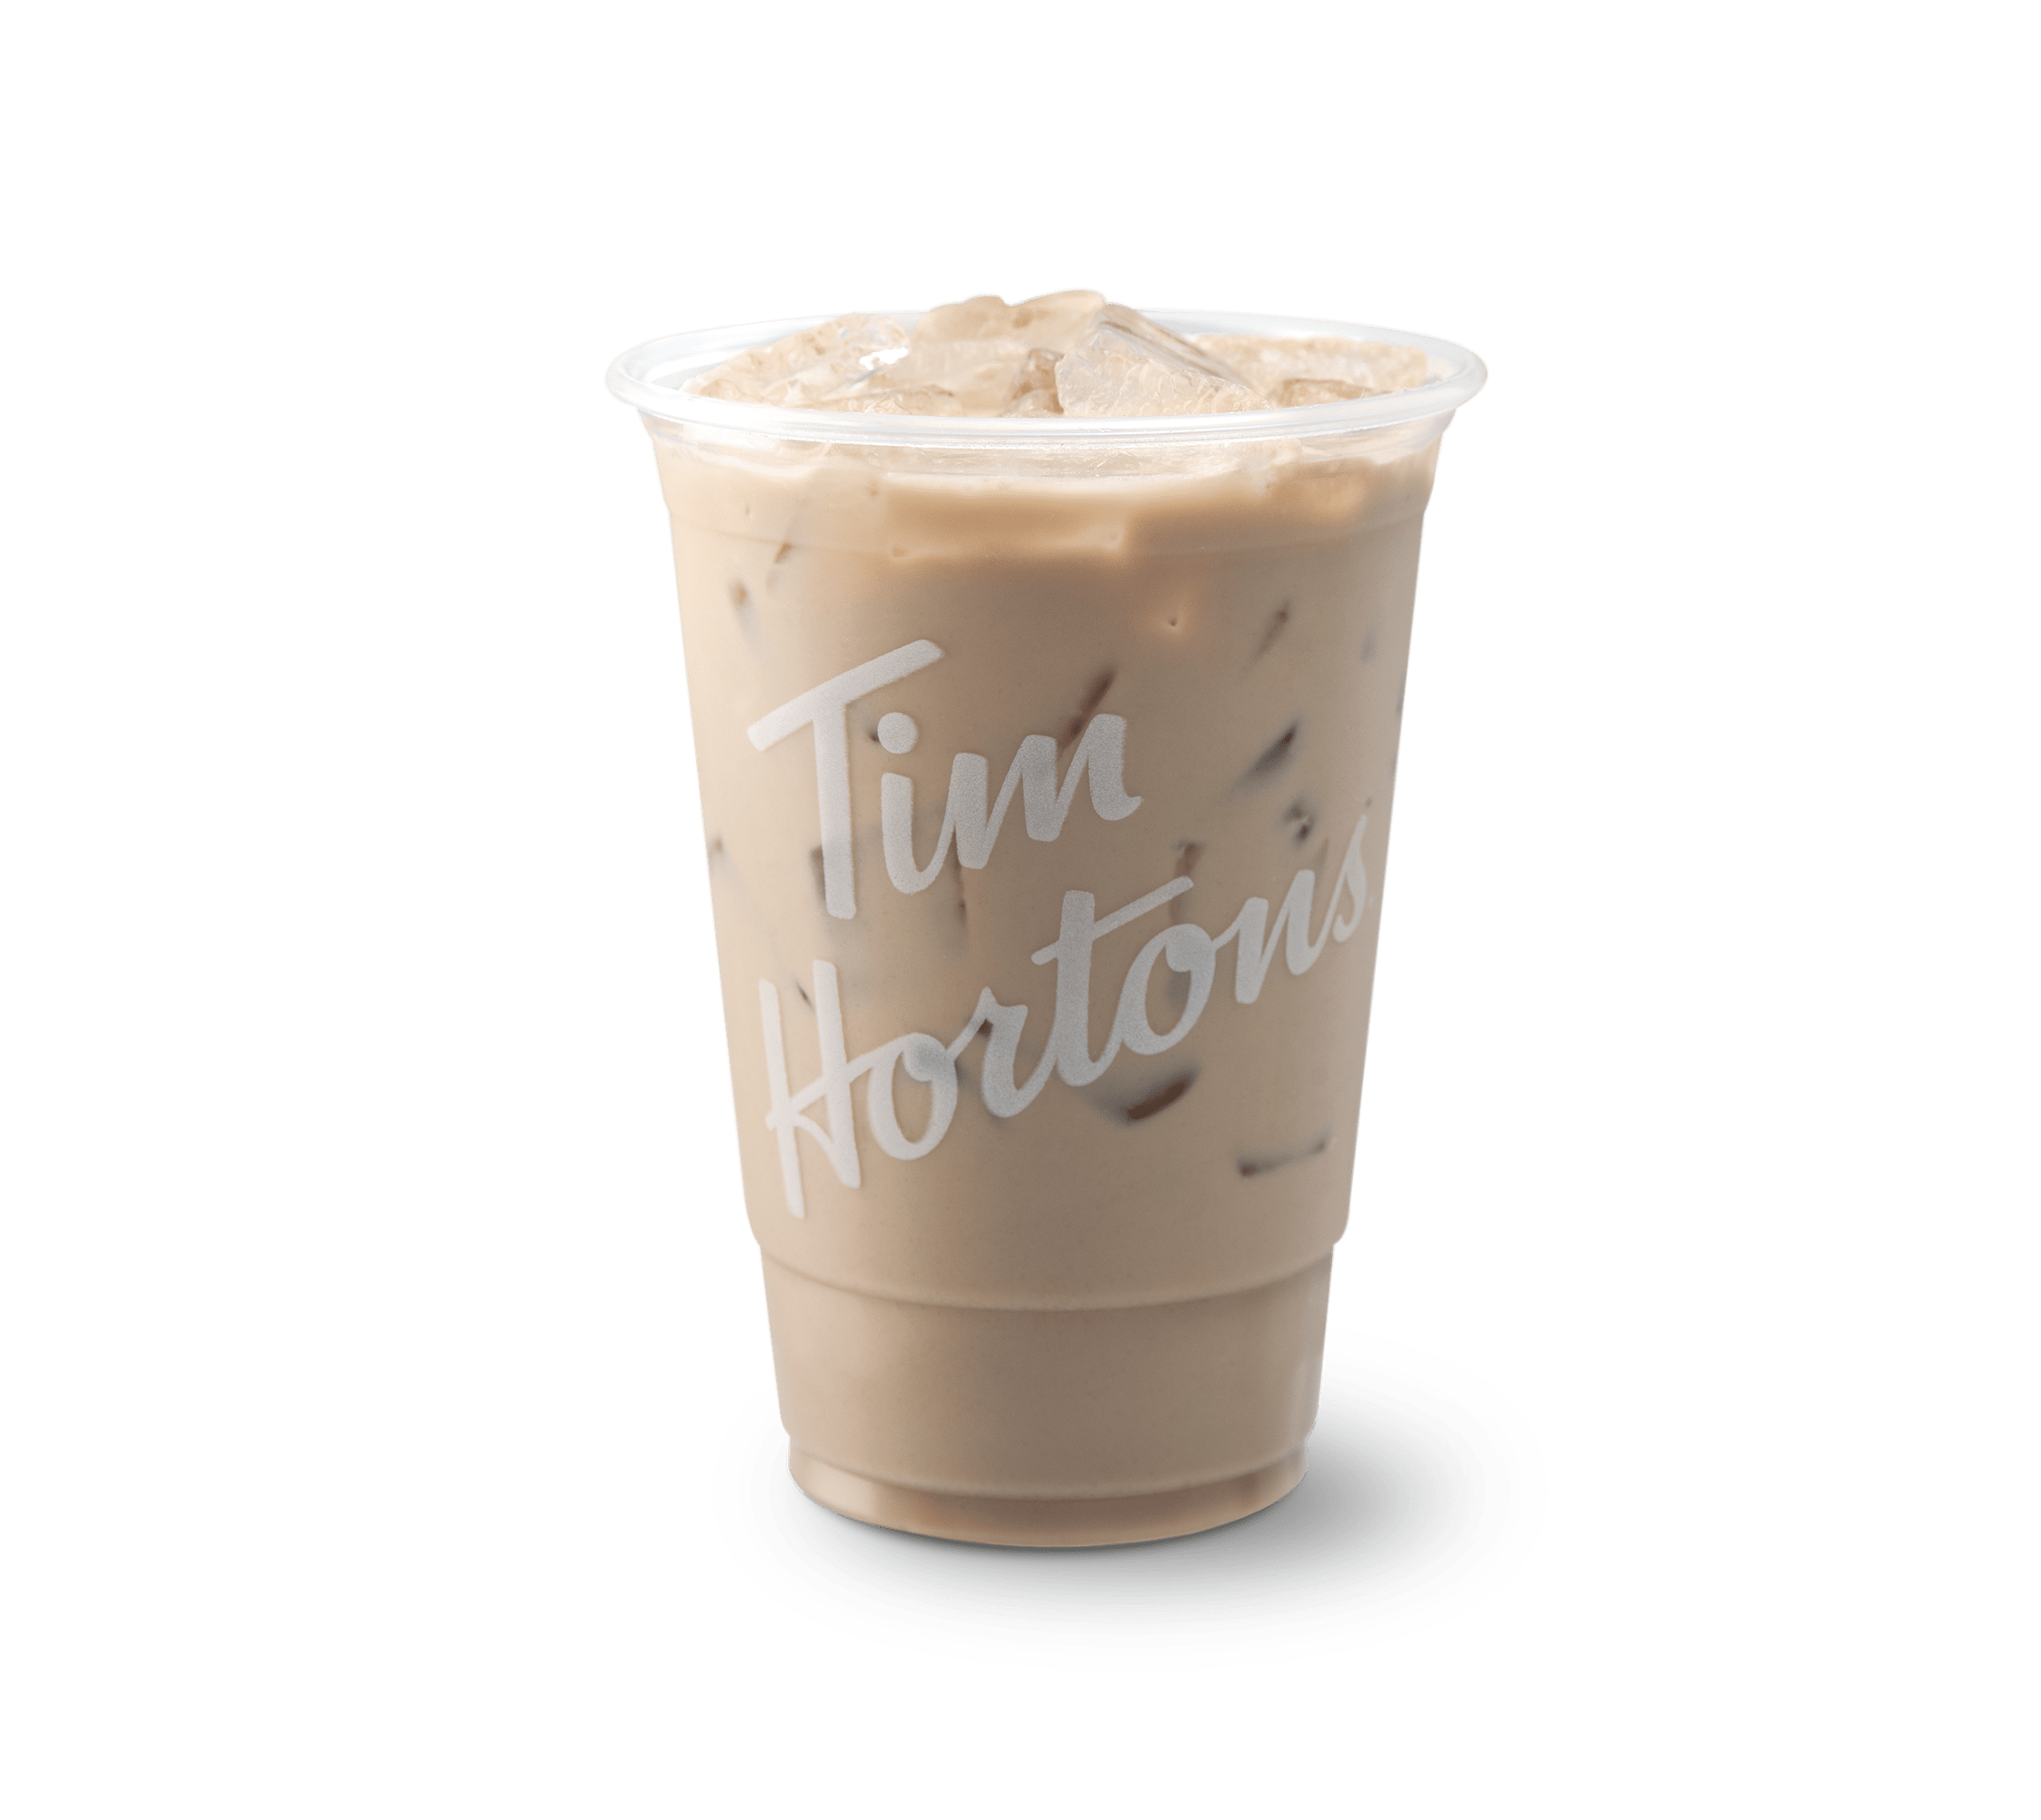 Does Tim Hortons have iced French vanilla?